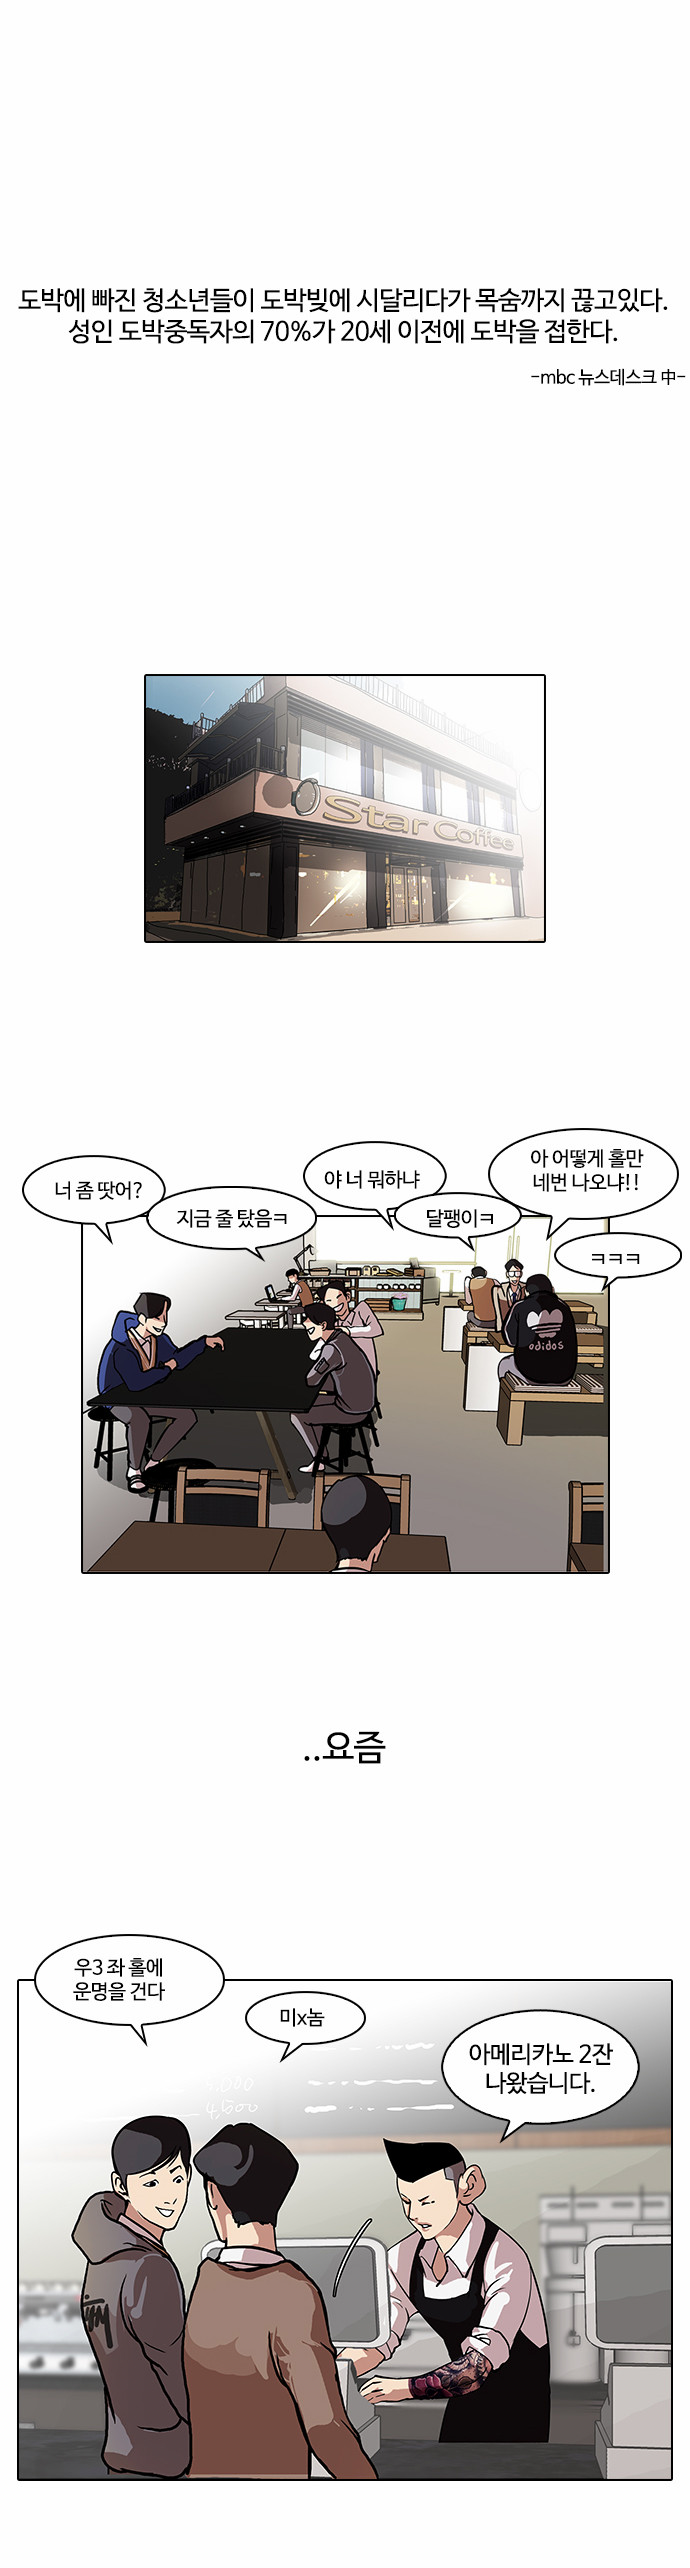 Lookism - Chapter 83 - Page 1